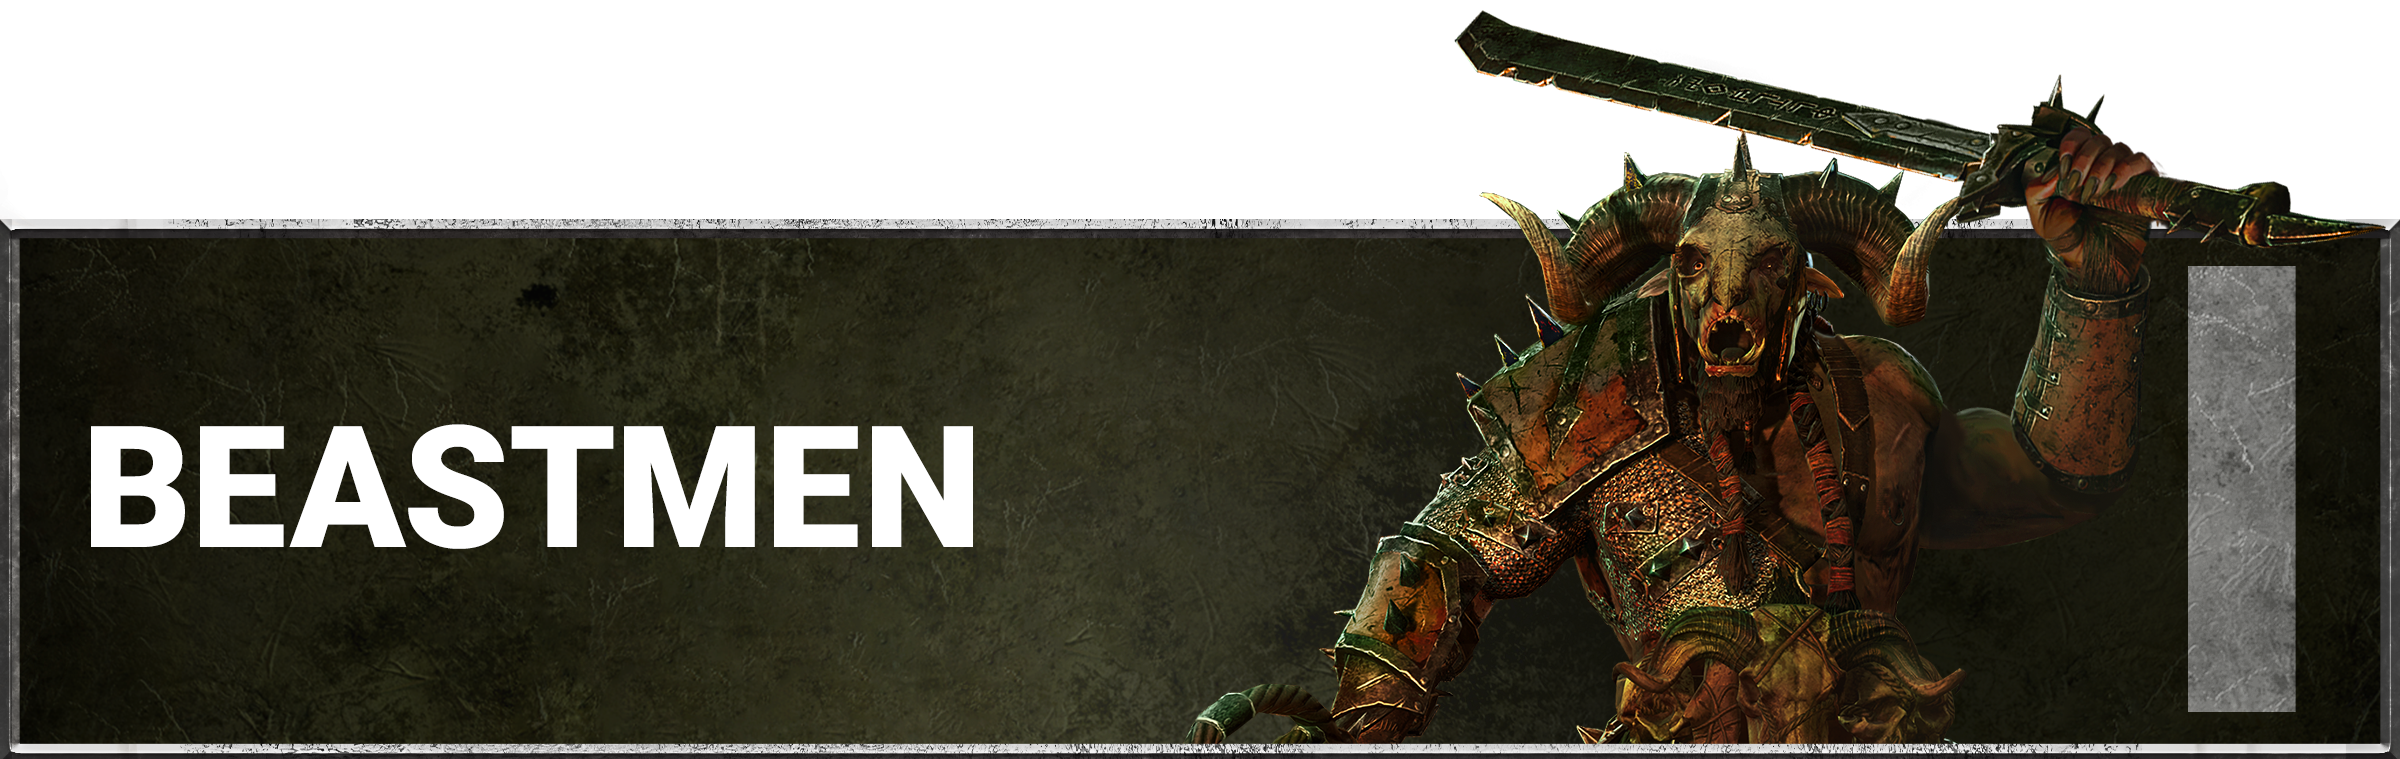 Race and balance changes for the Beastmen race and factions, available from Total War: WARHAMMER II.